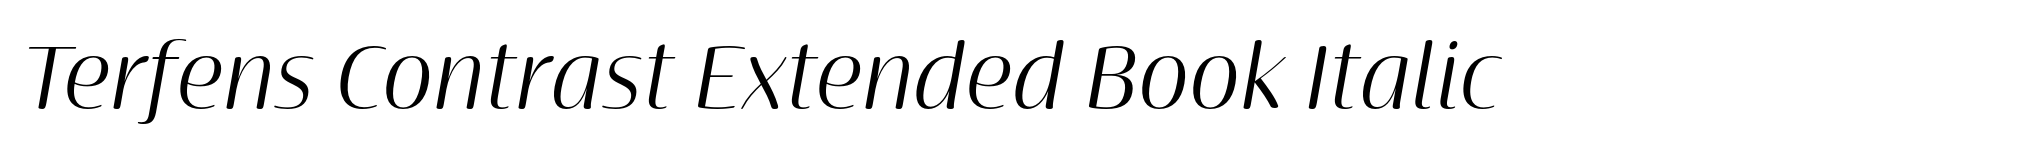 Terfens Contrast Extended Book Italic image